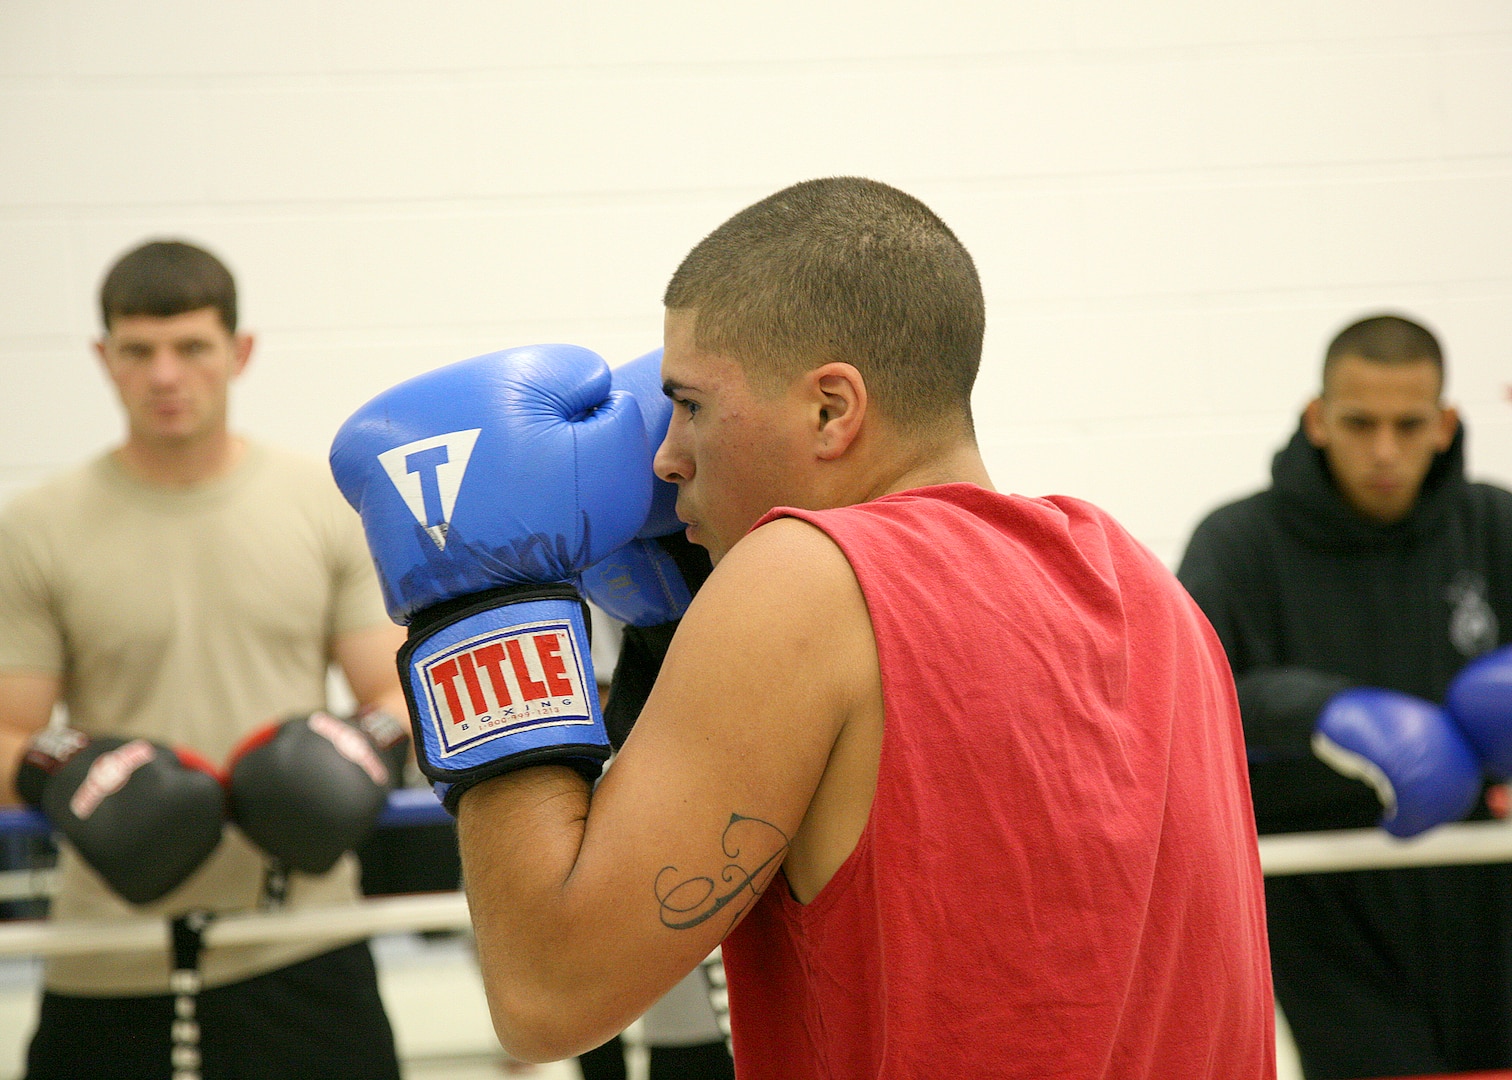 3/24/2009 - Anthony Nieves works on his form during the Air Force boxing camp at the Bennett Fitness Center. Nieves is from MacDill Air Force Base, Fla. (USAF photo by Robbin Cresswell)